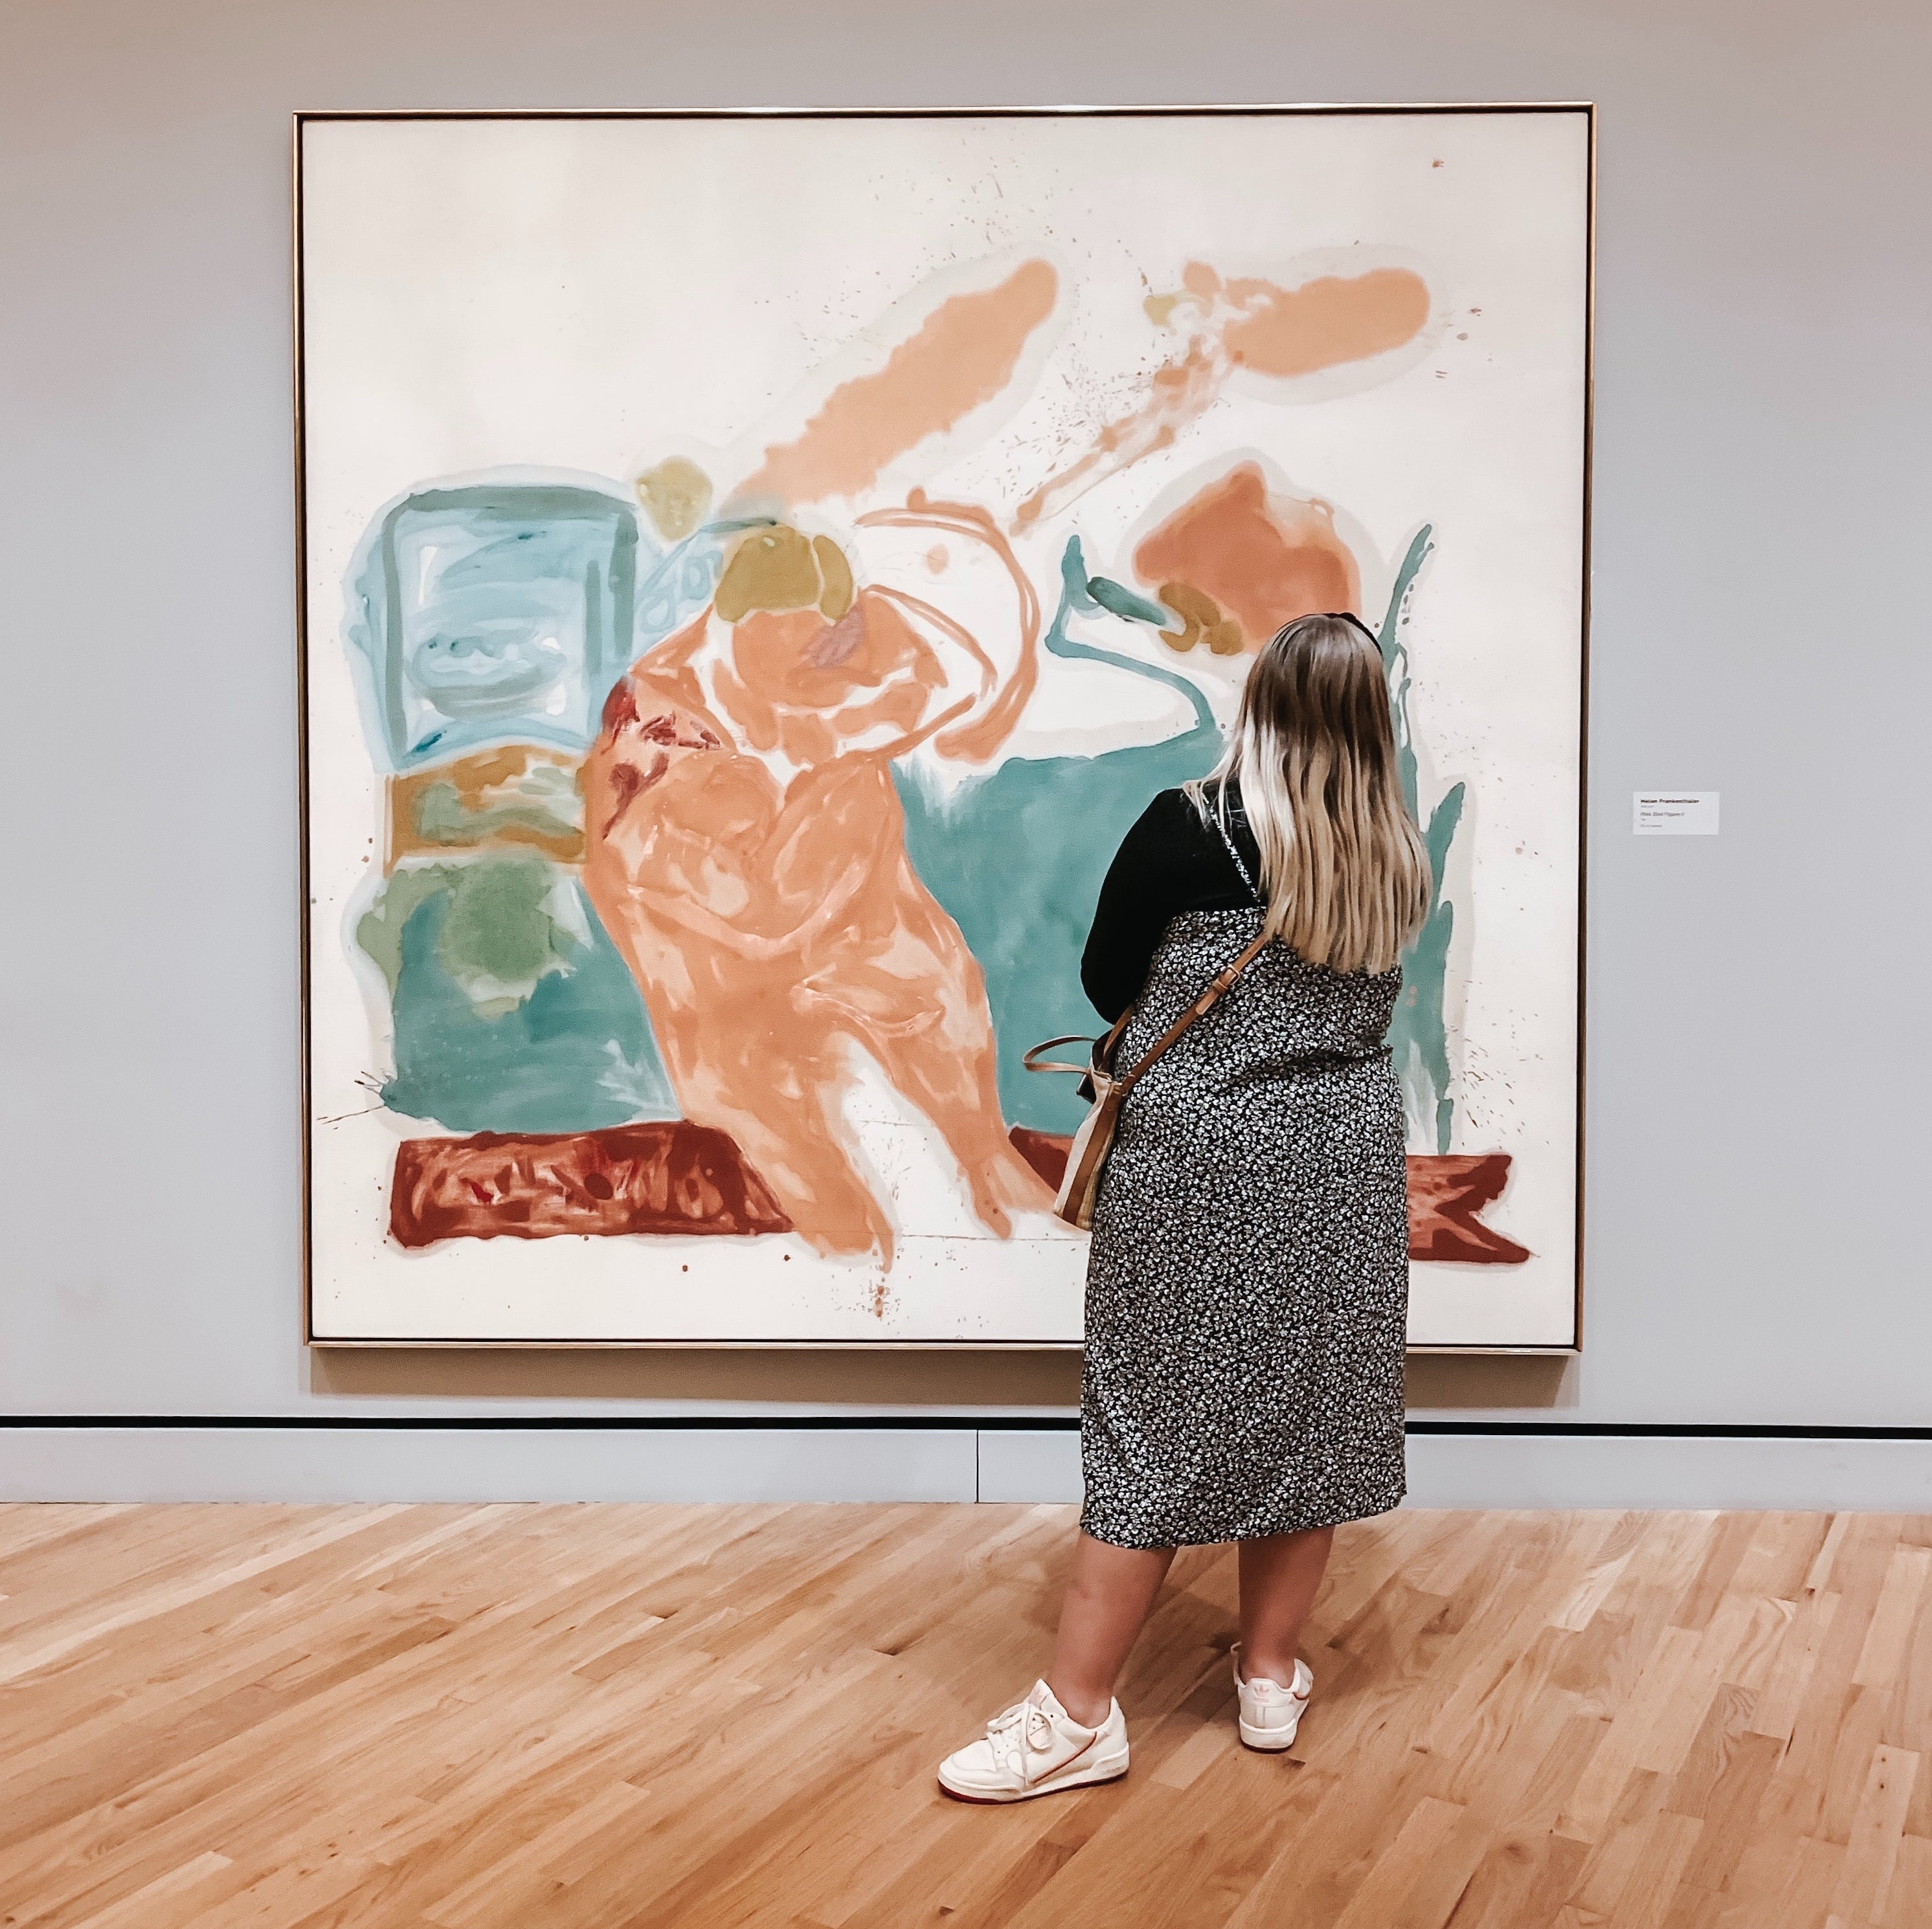 A person examines a large painting in a gallery